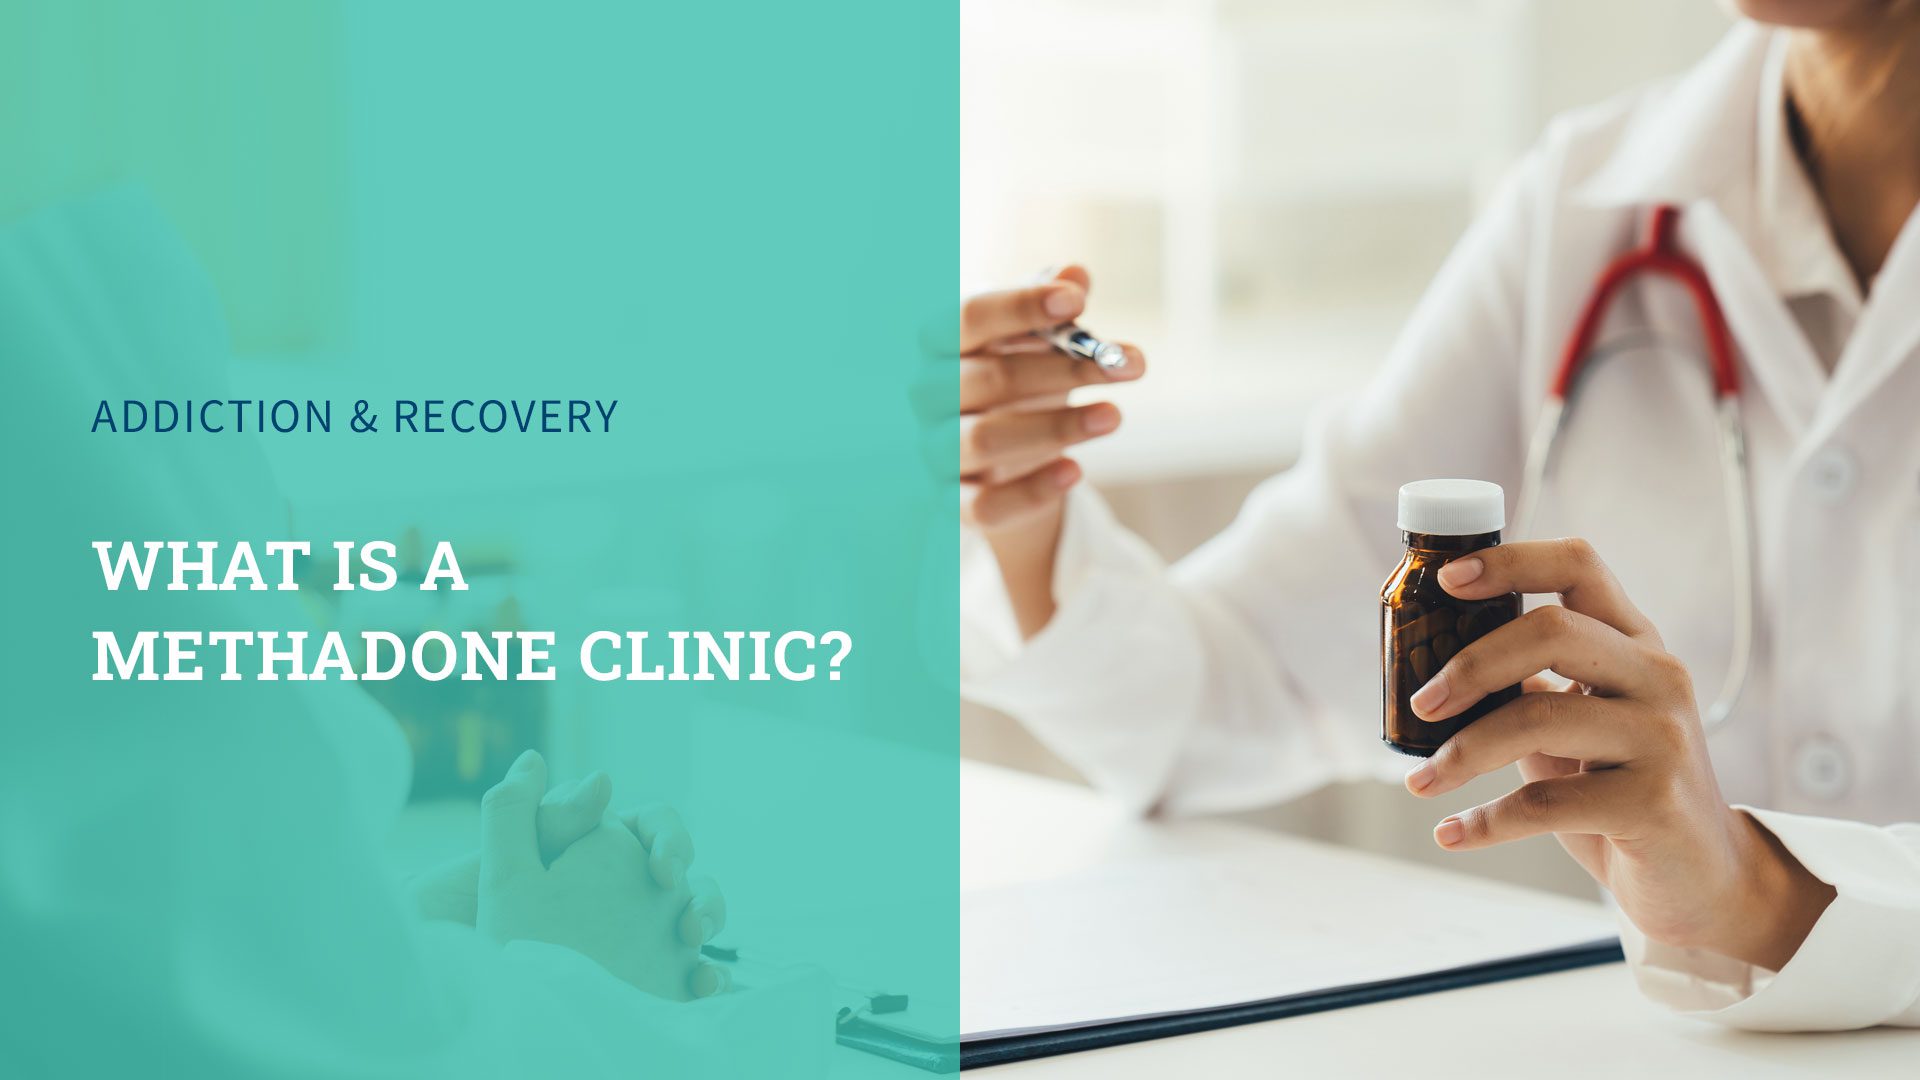 What is a Methadone Clinic?